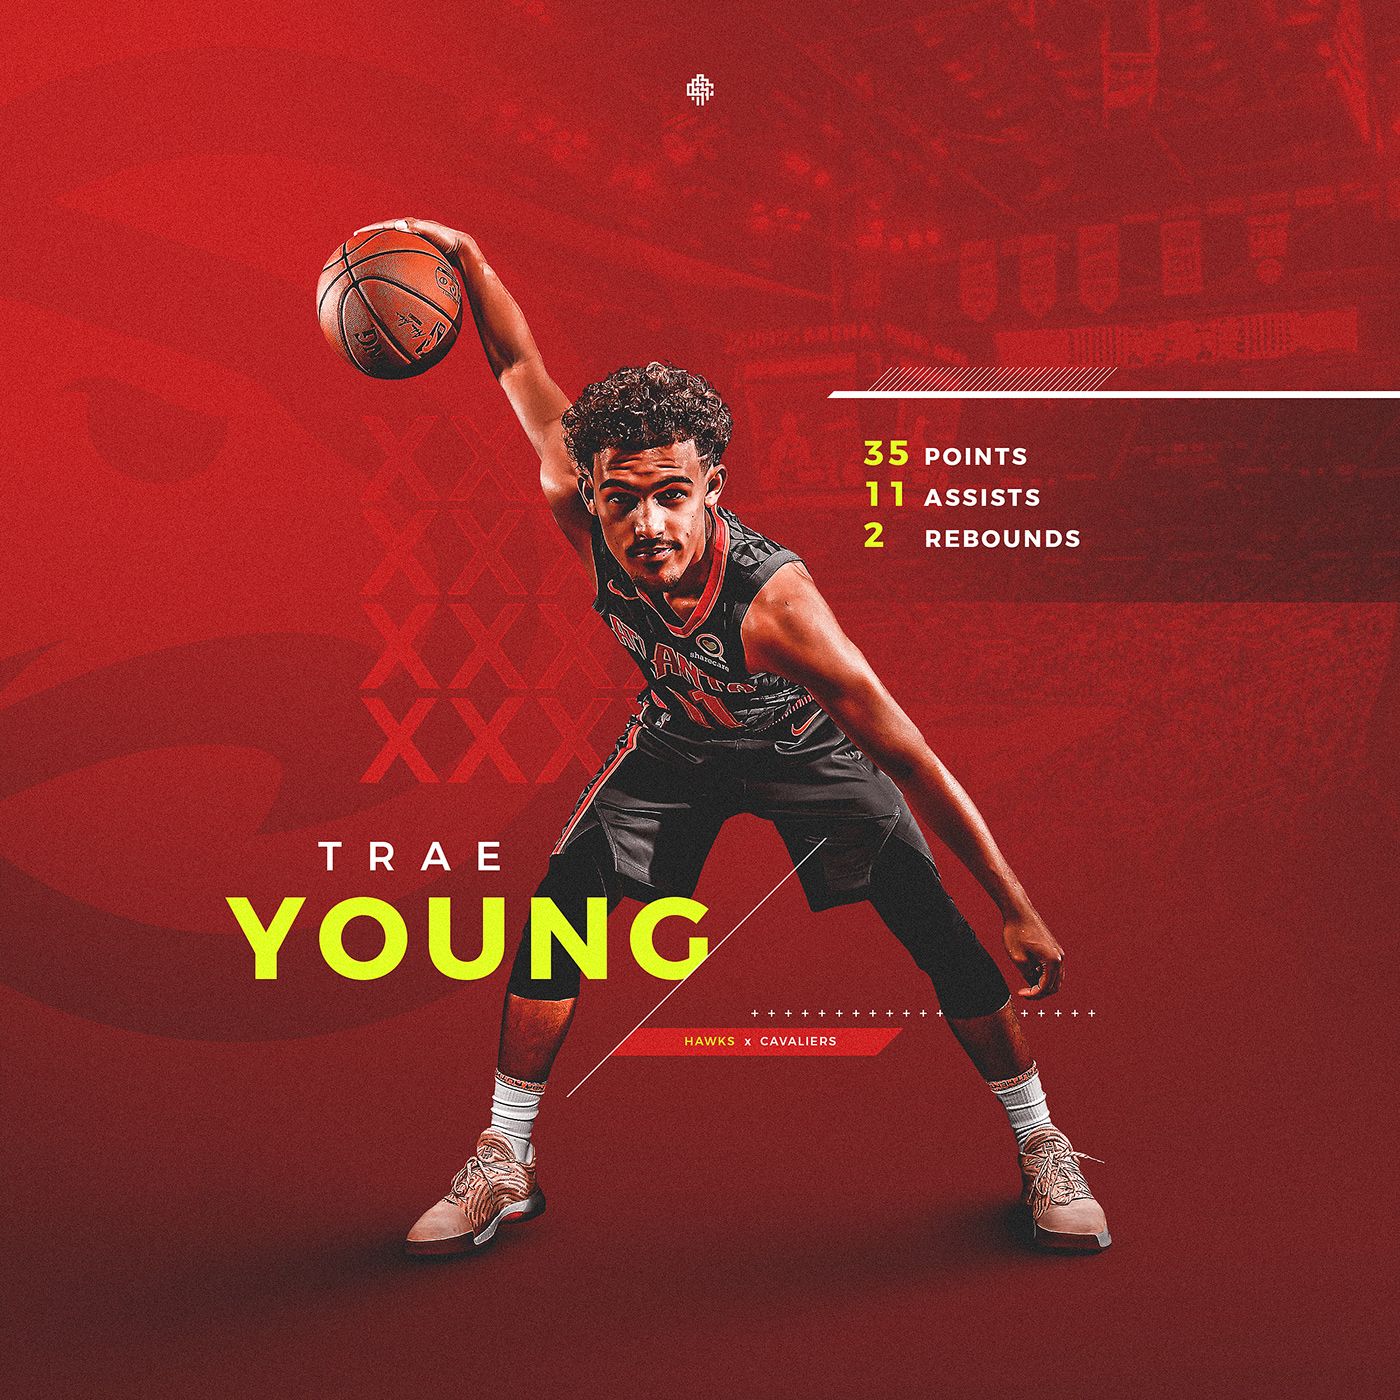 Trae Young Wallpaper Free Trae Young Background